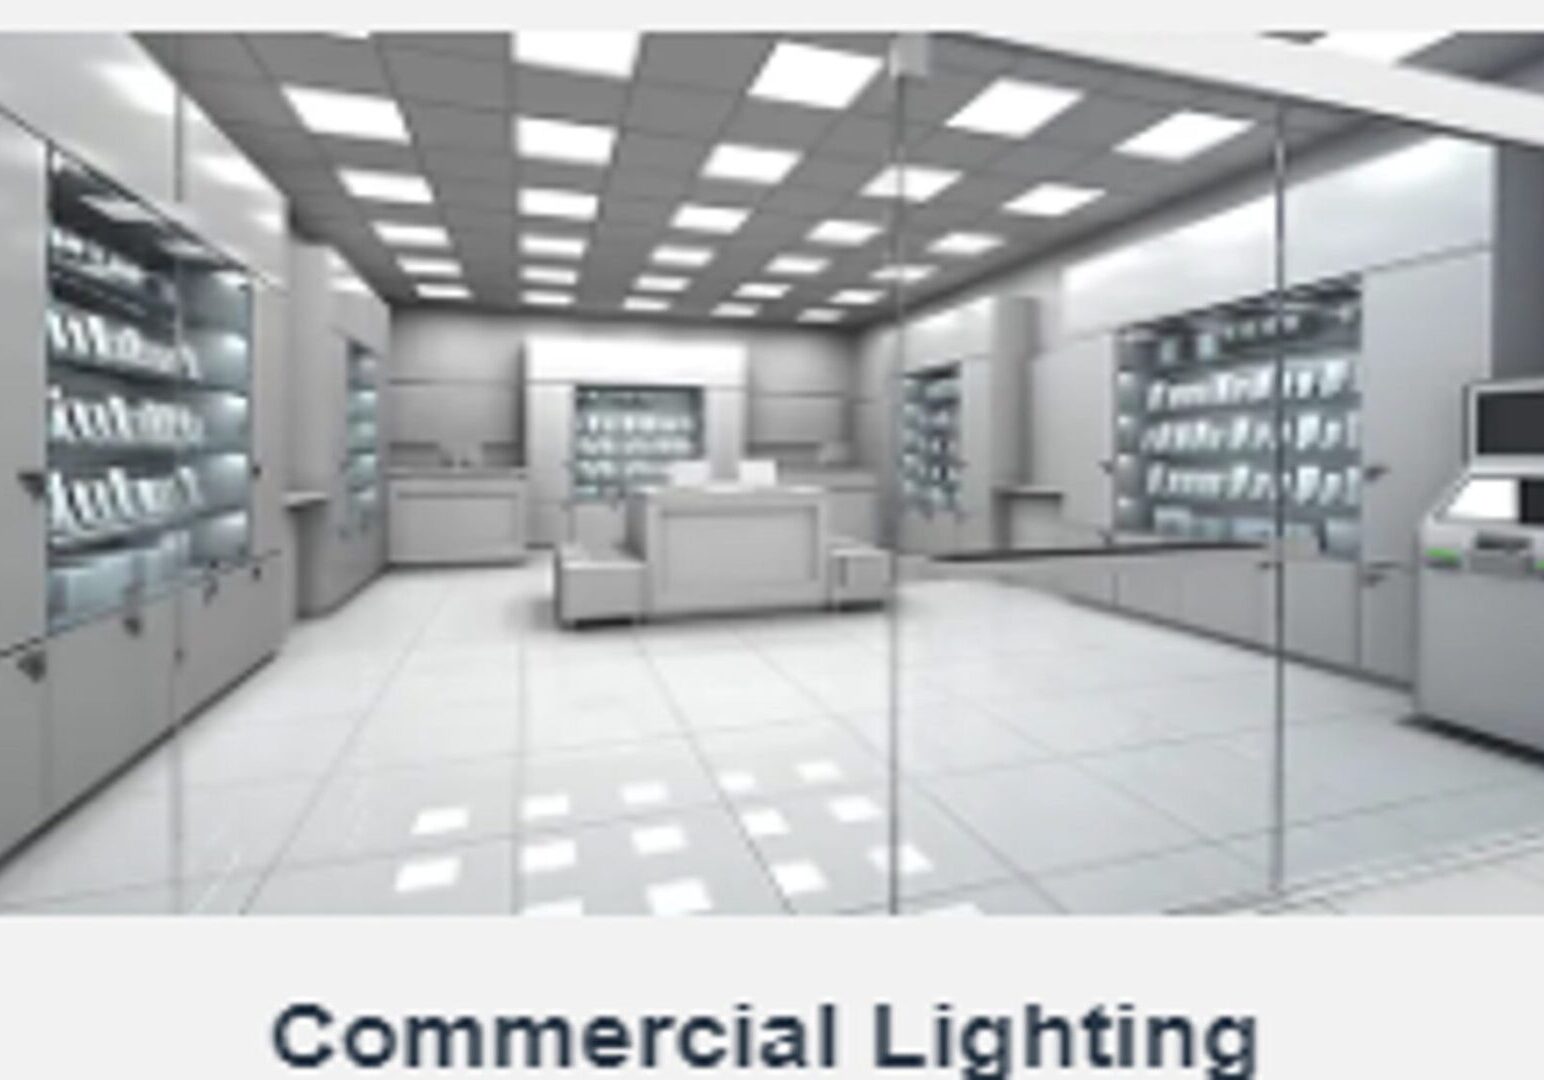 A commercial lighting store with many lights on the ceiling.